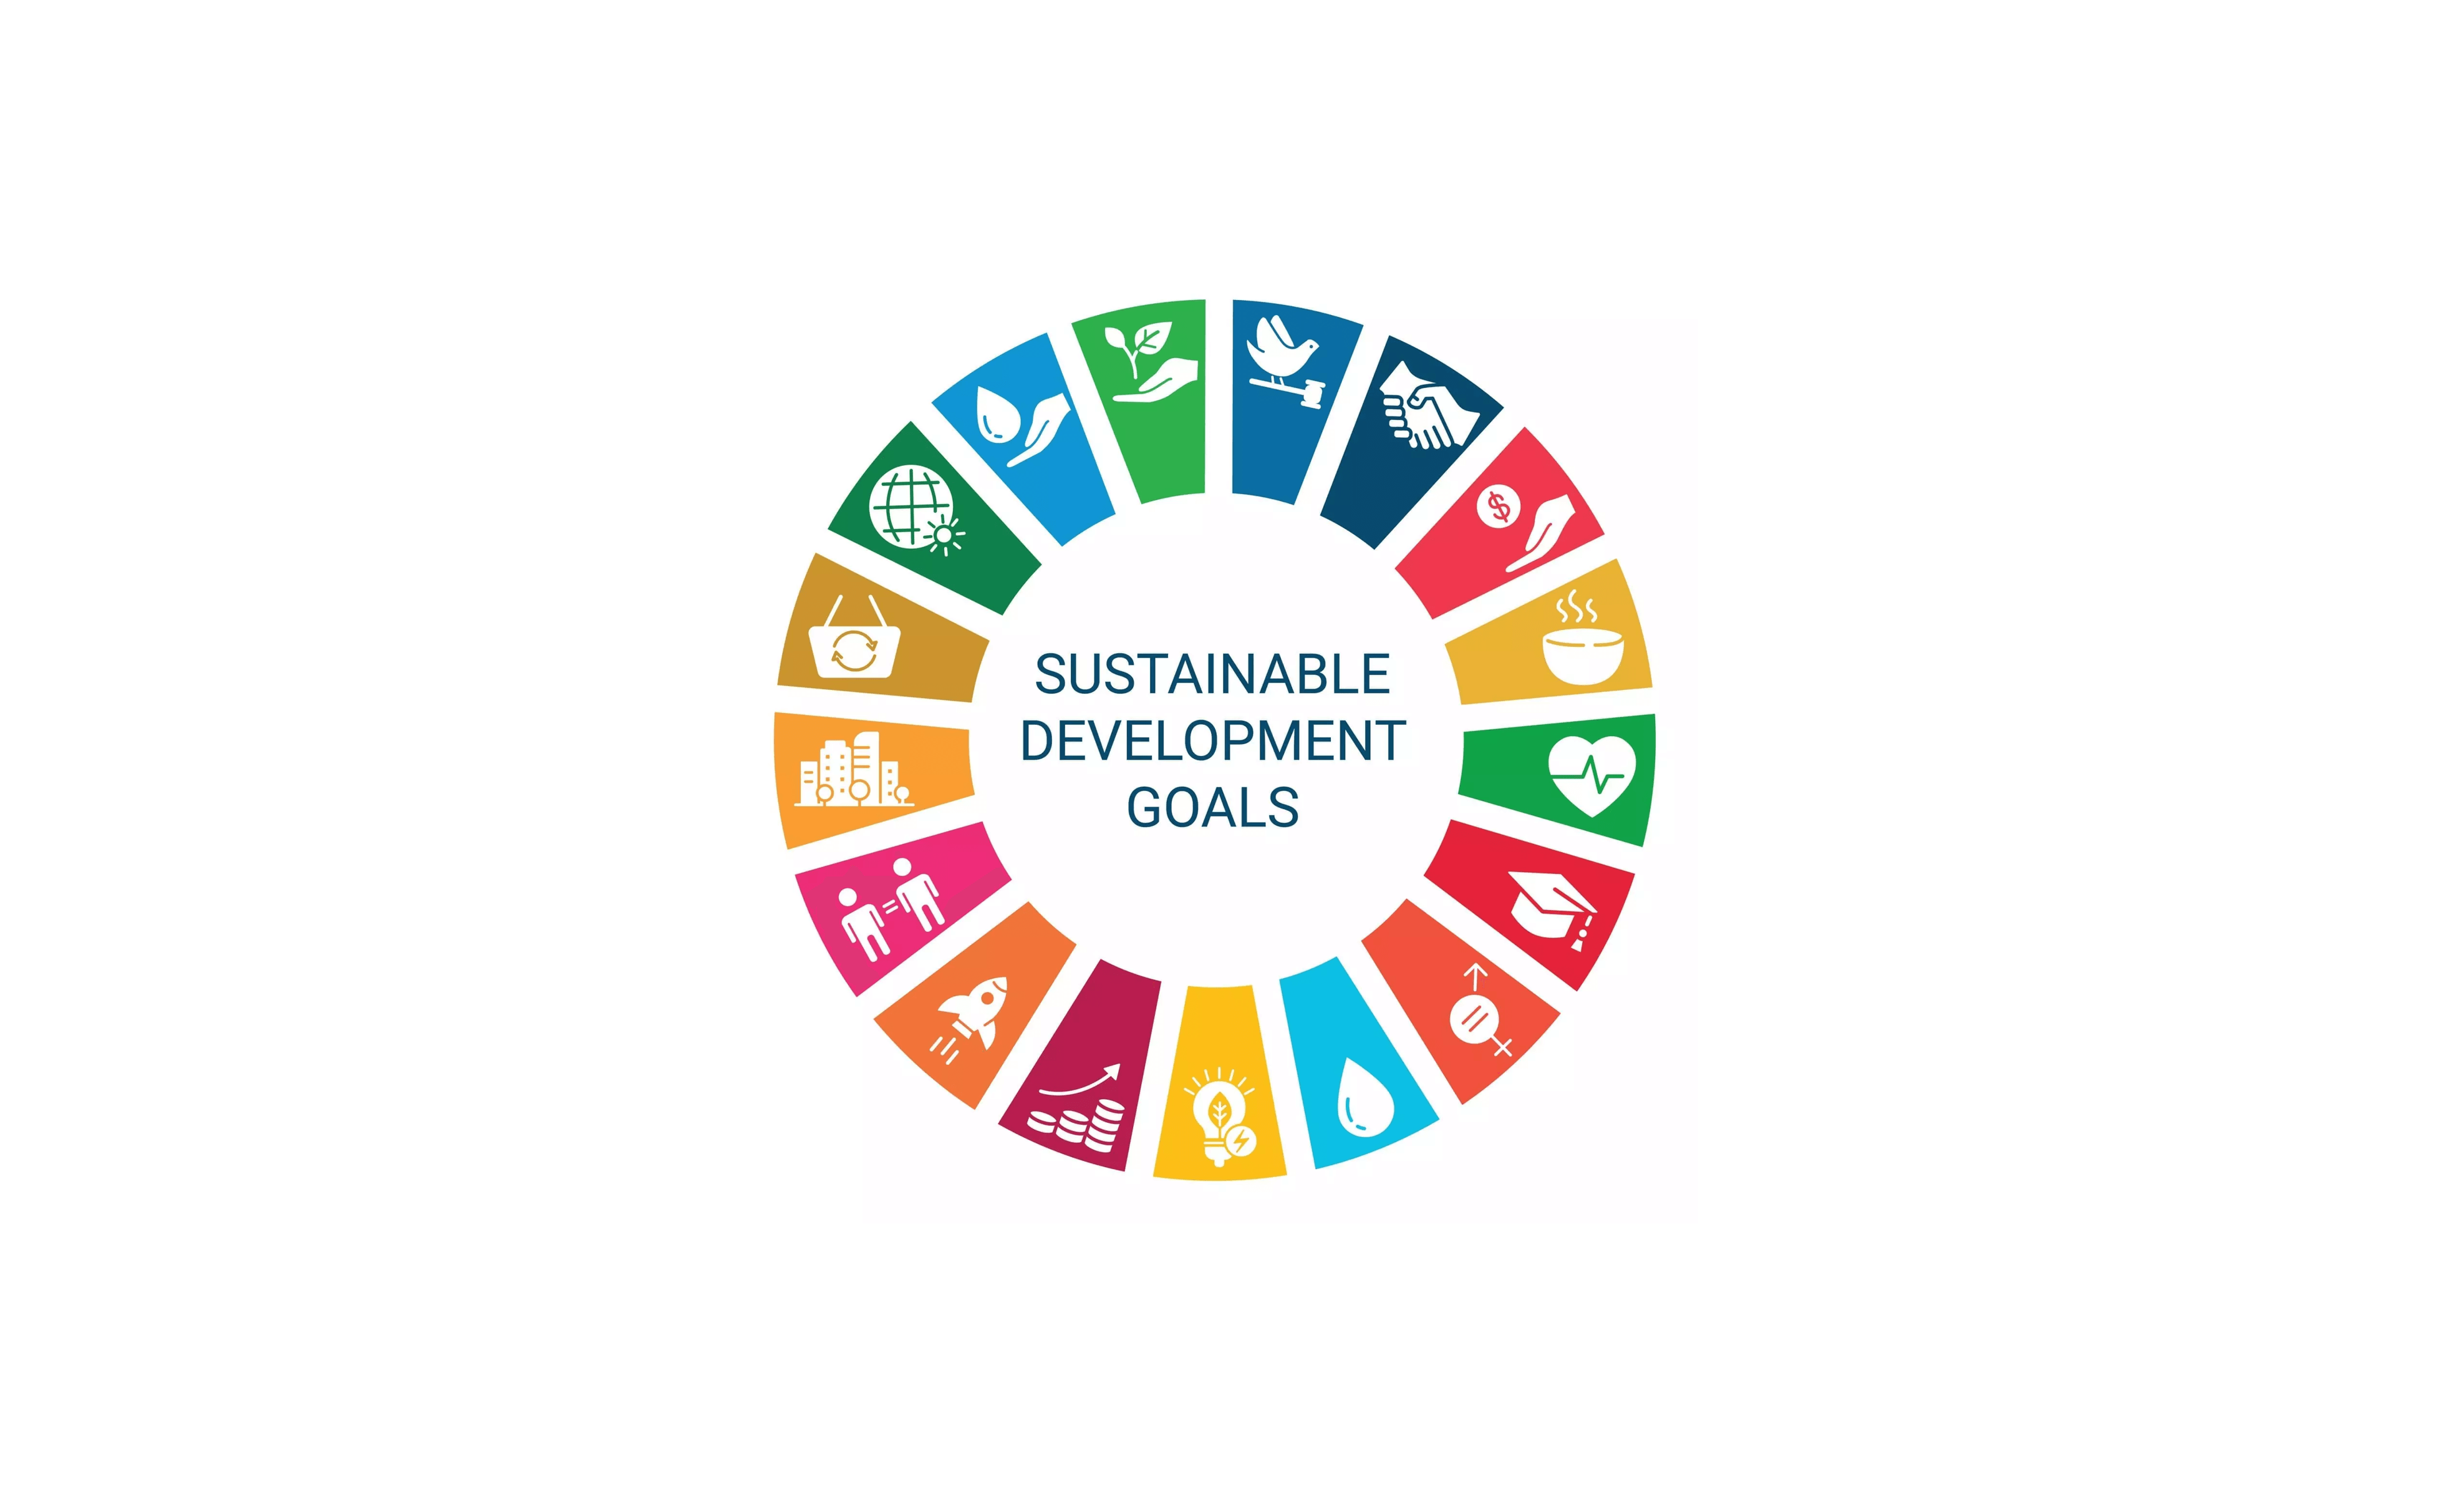 Aligning to the Sustainable Development Goals